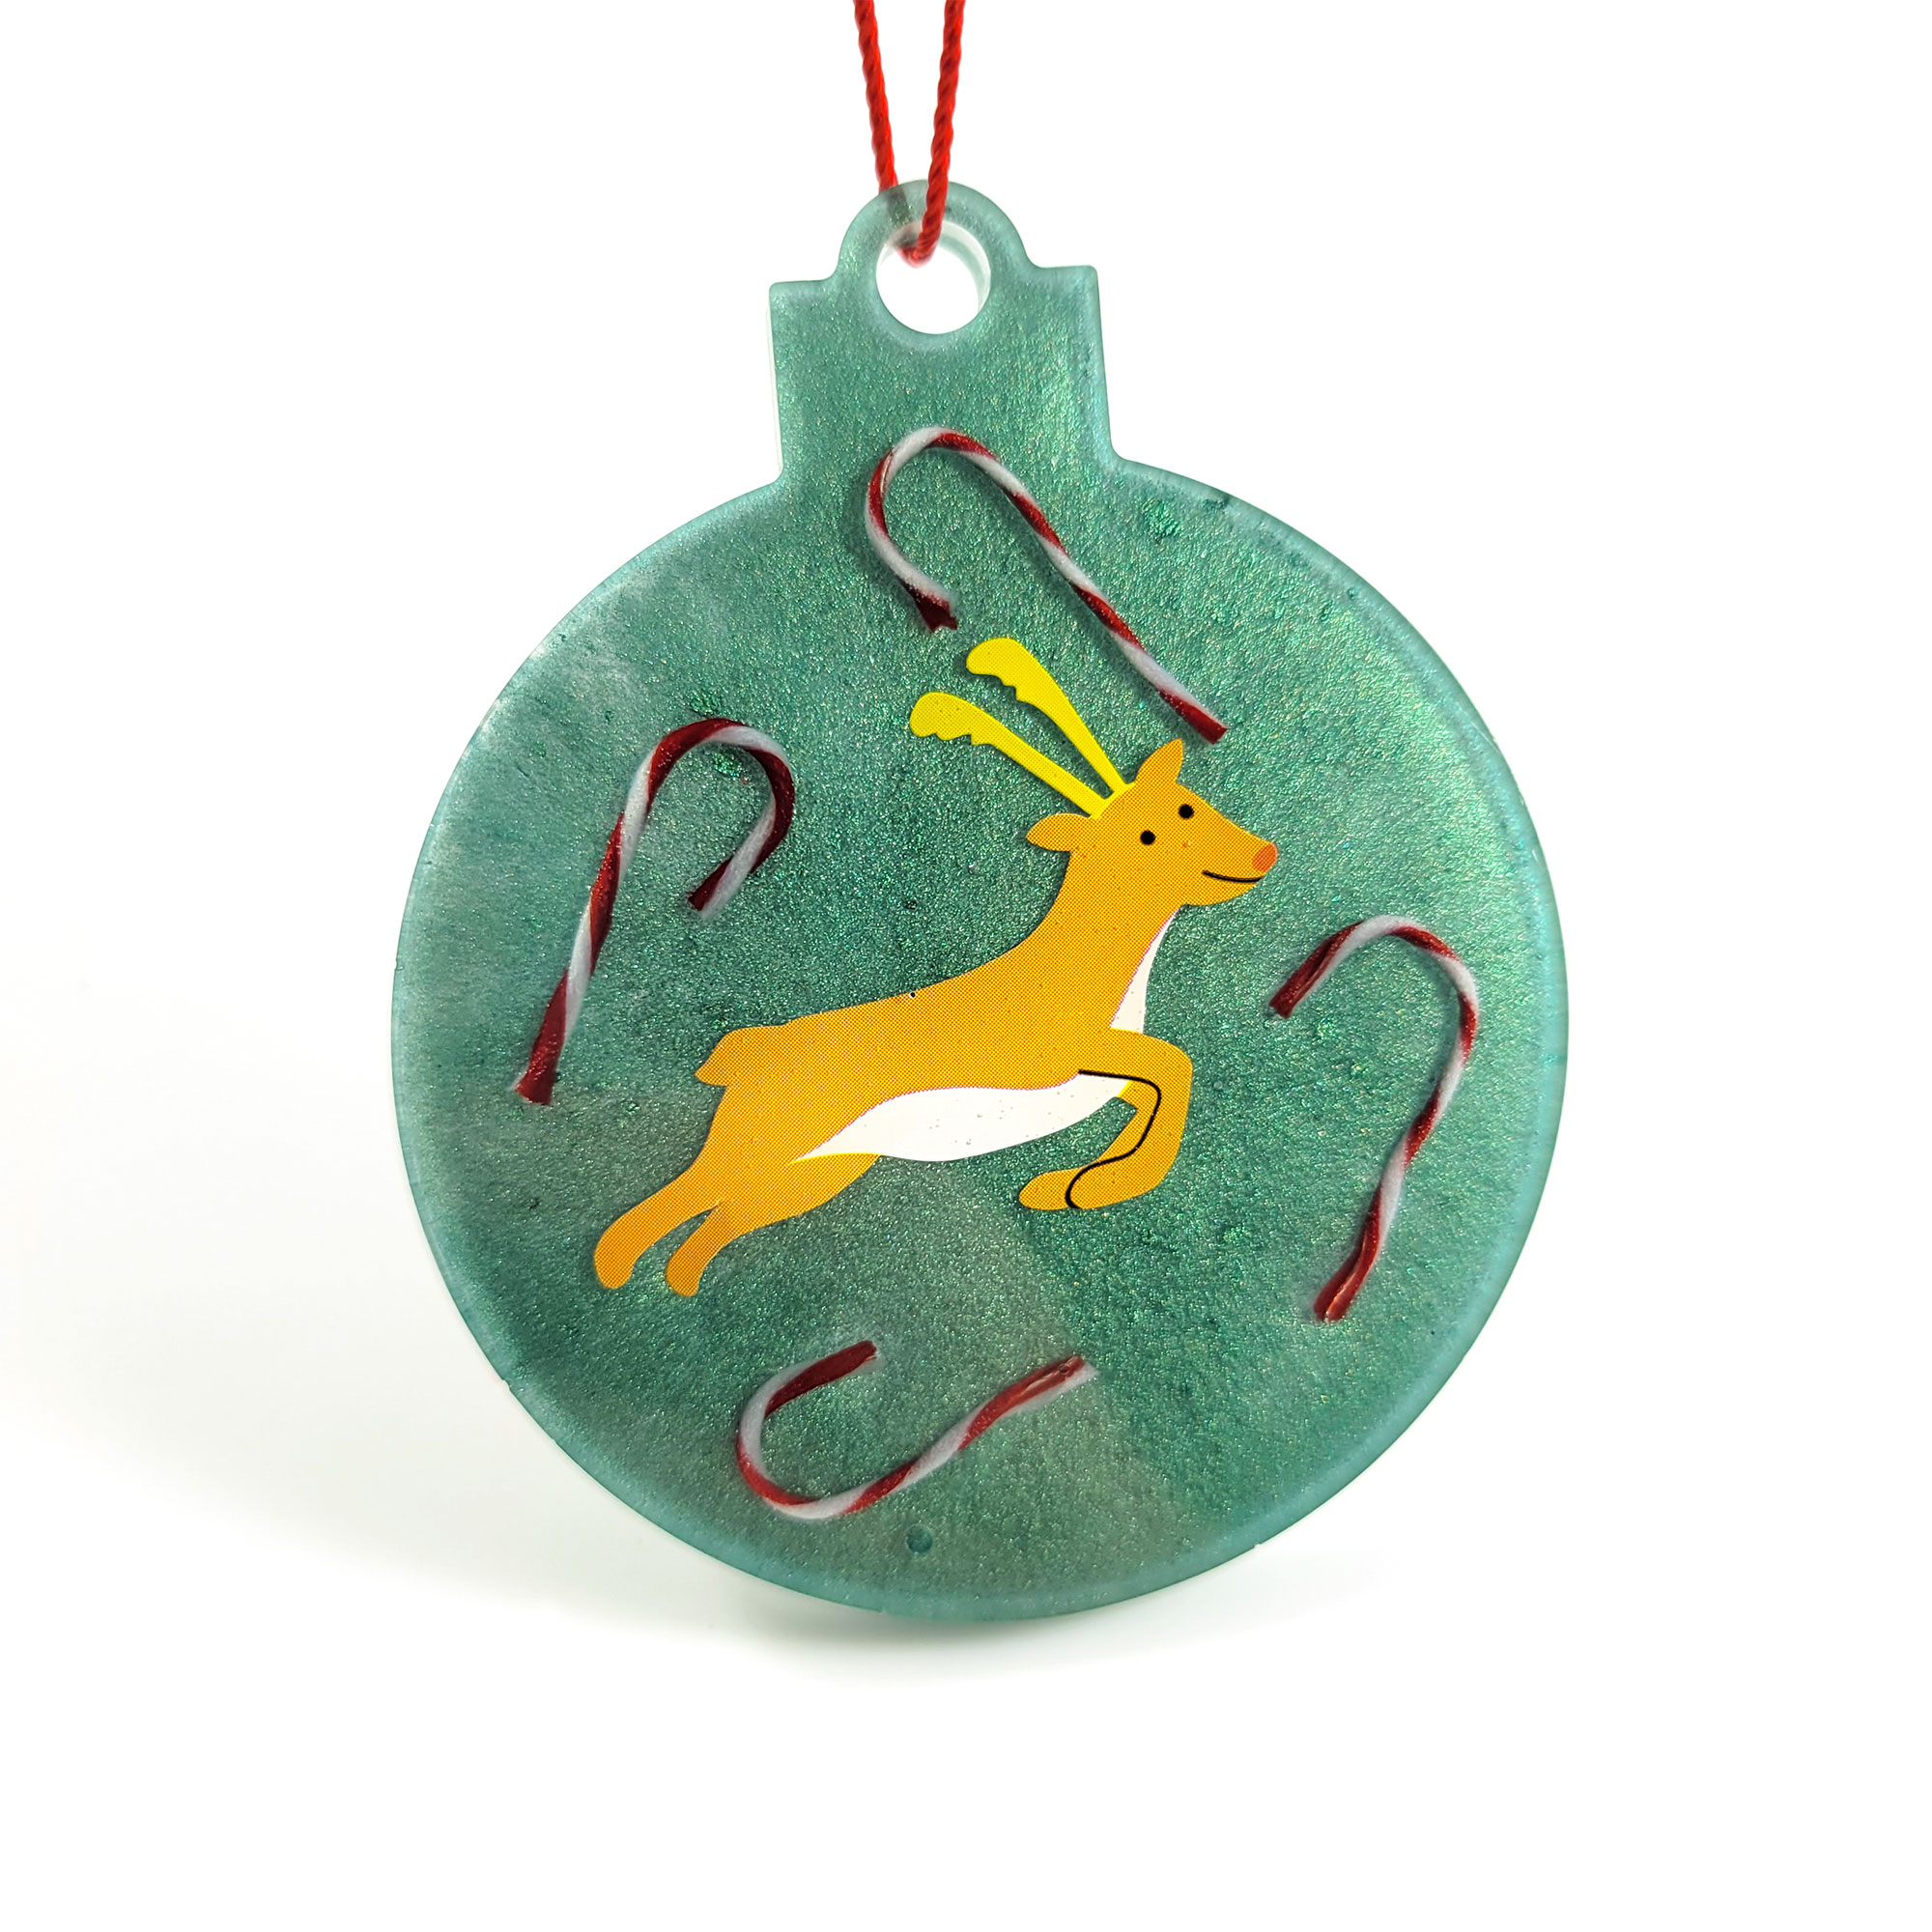 Festive Round Ornaments by Wilde Designs